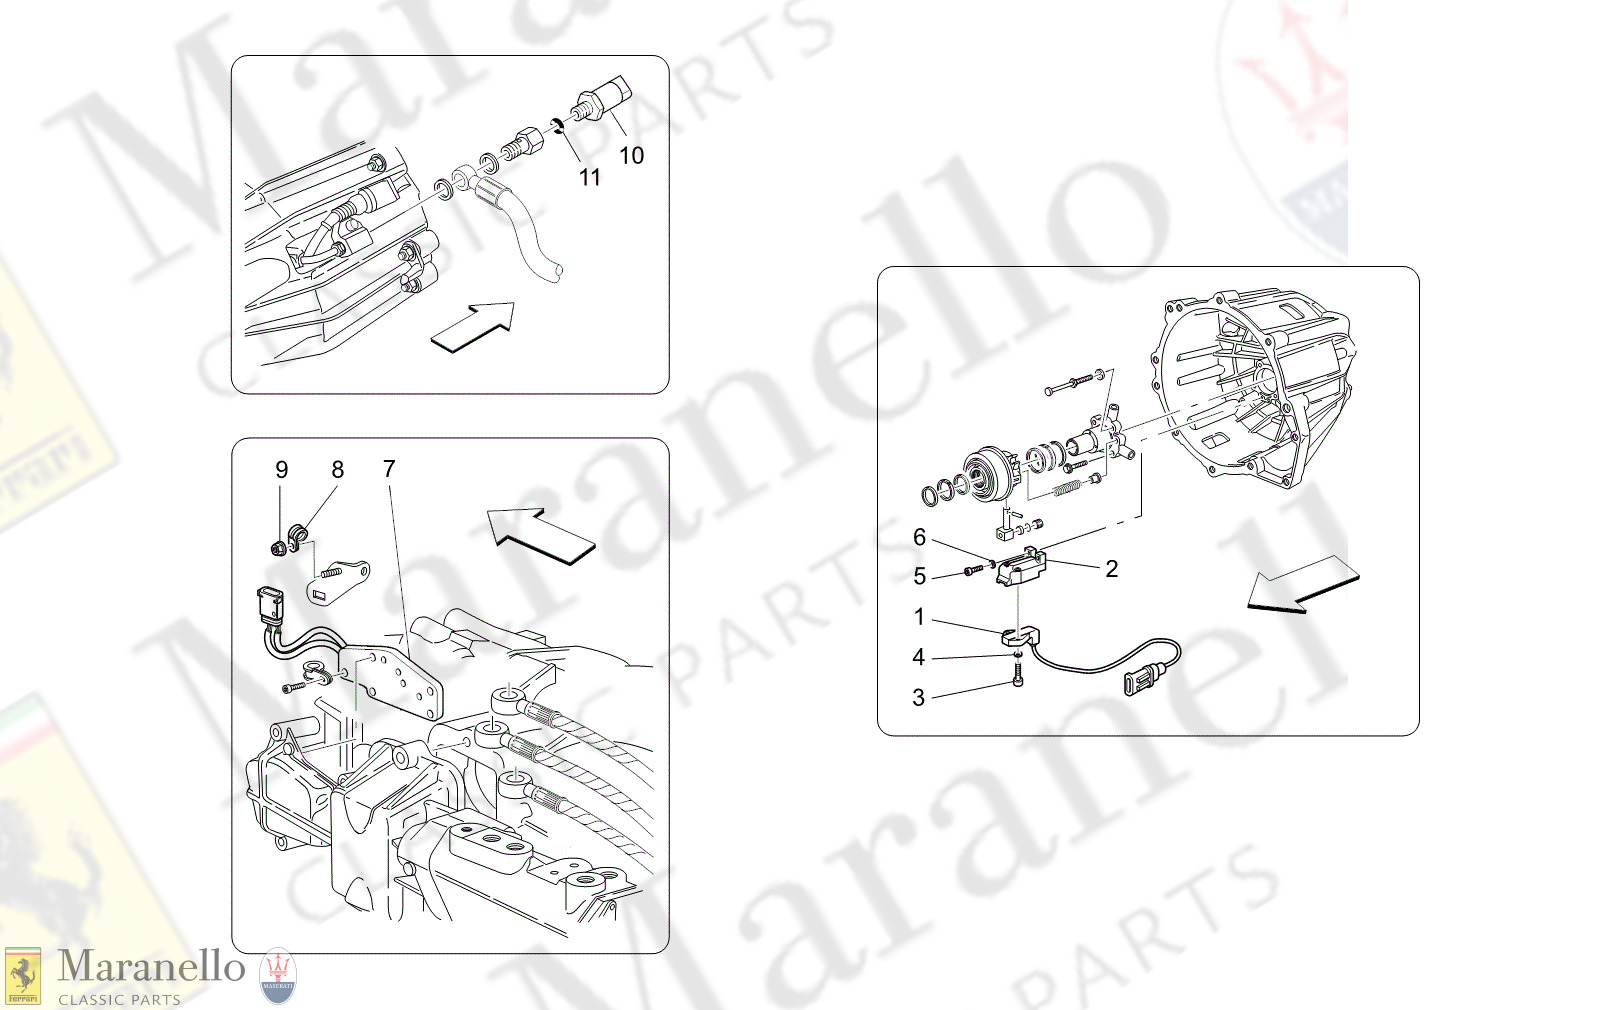 02.90 - 12 - 0290 - 12 Electronic Clutch Control For F1 Gearbox